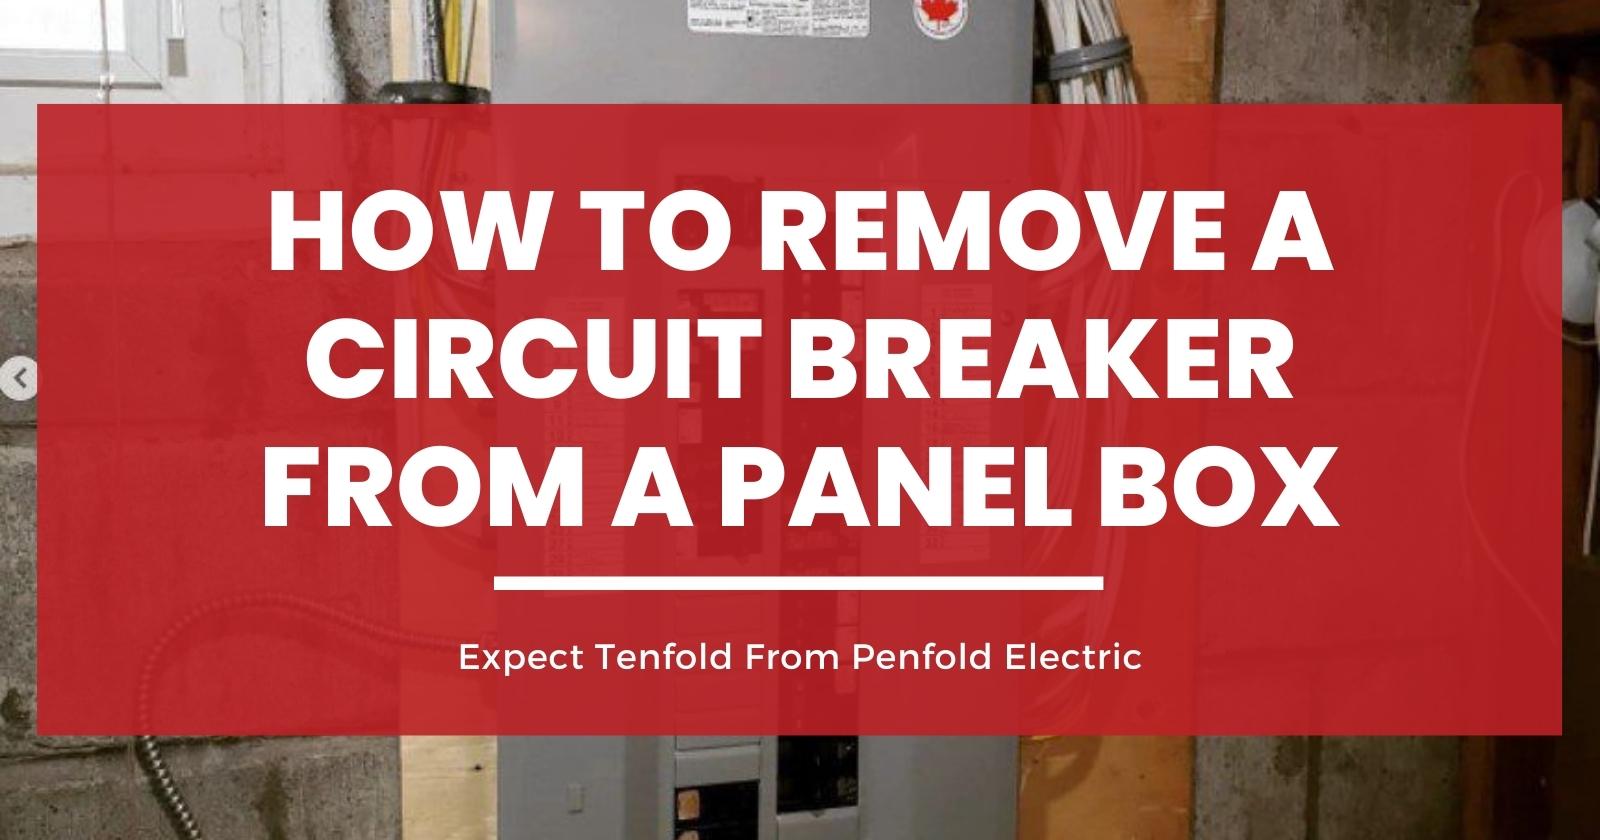 How to Remove a Circuit Breaker from a Panel Box